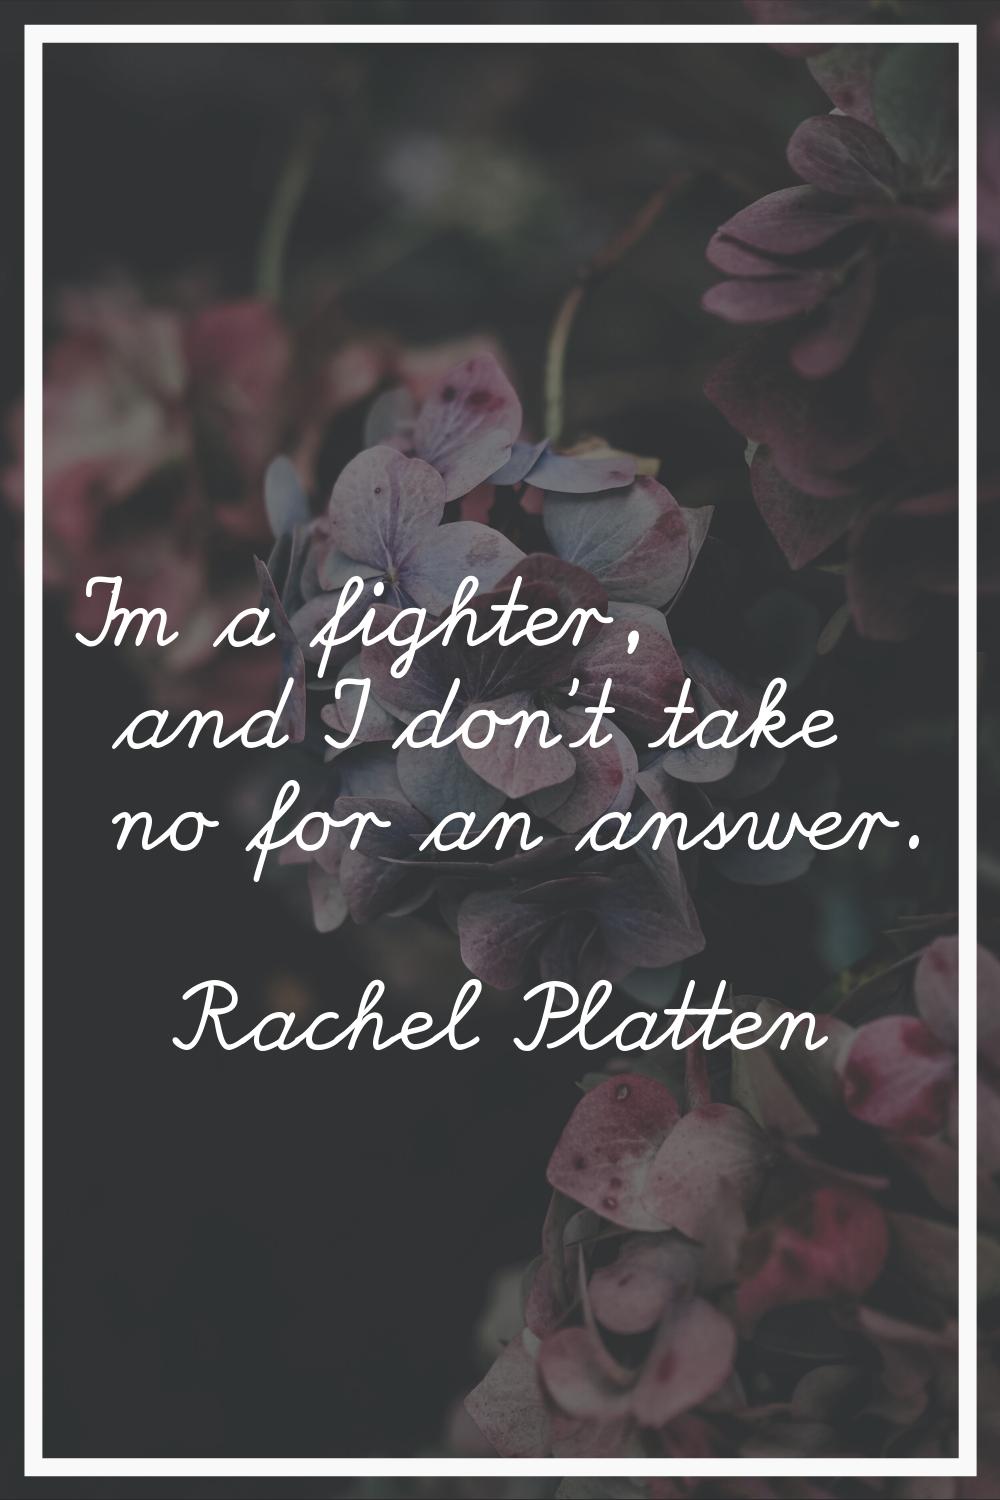 I'm a fighter, and I don't take no for an answer.